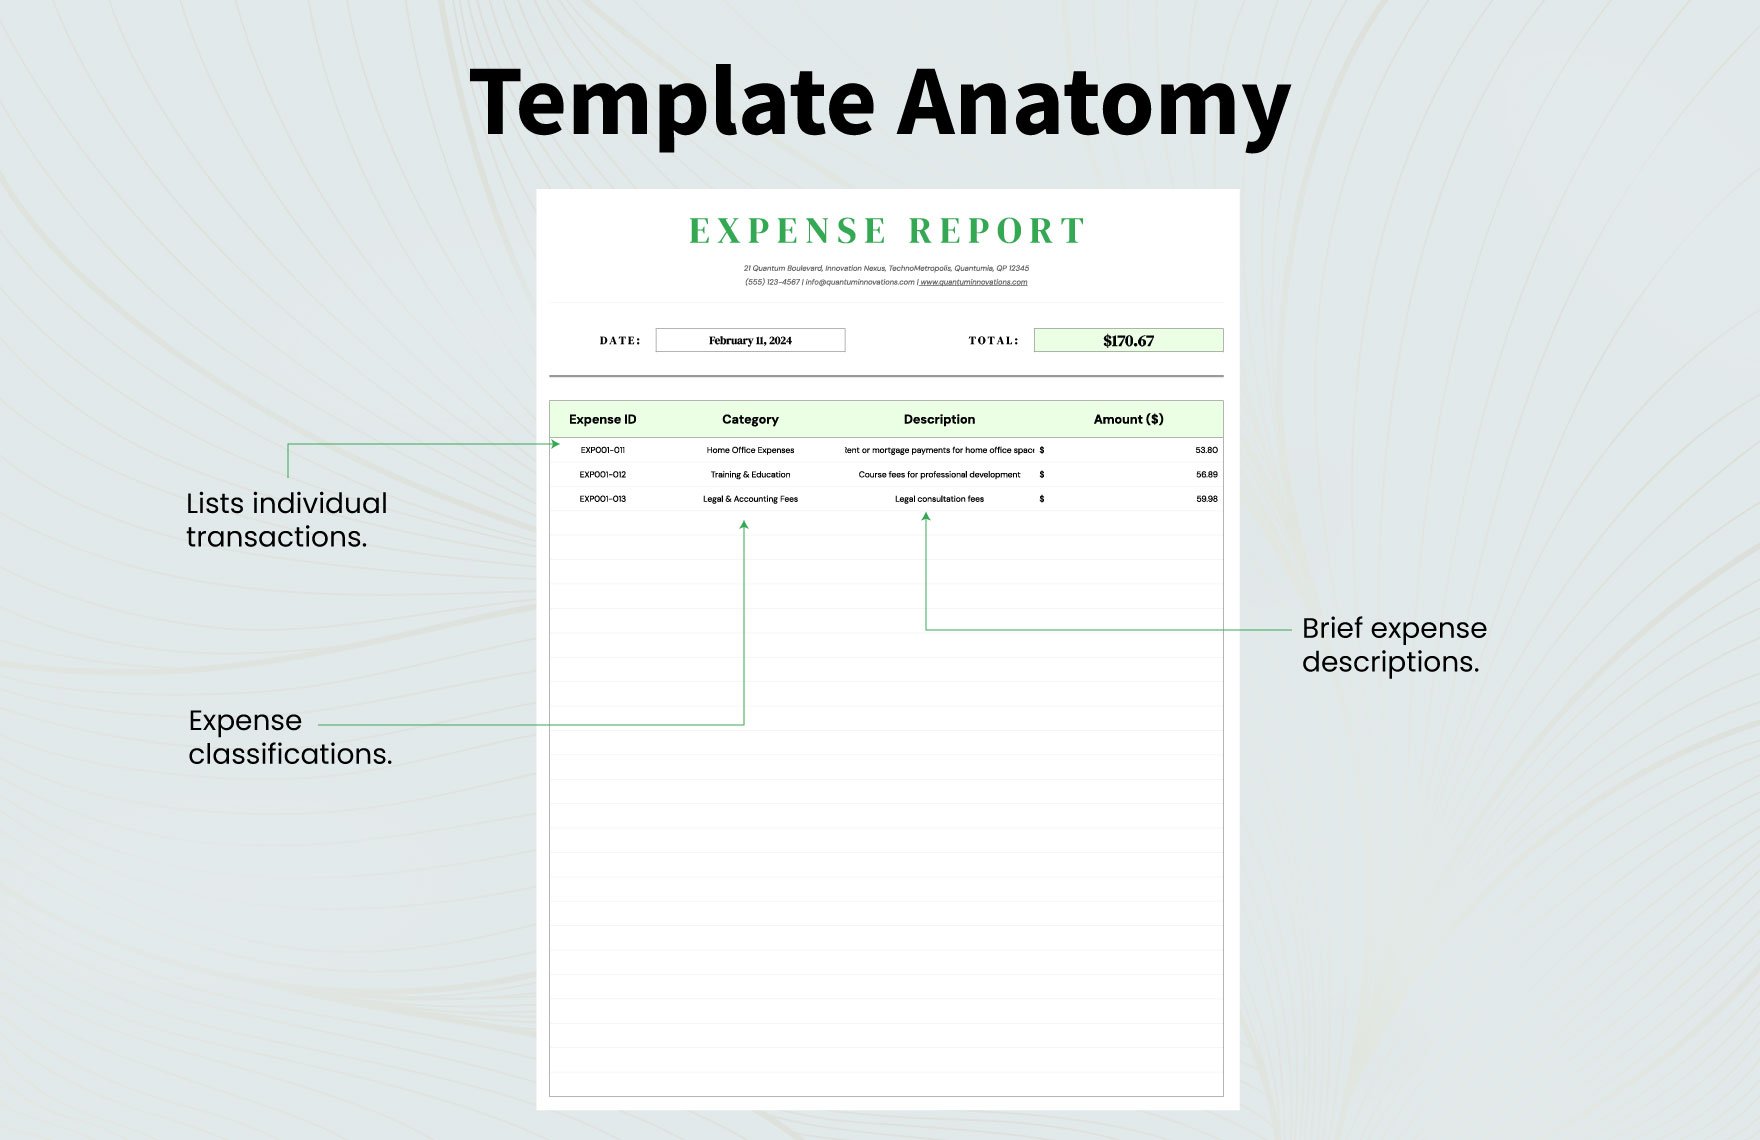 Self-Employed Expense Report Template